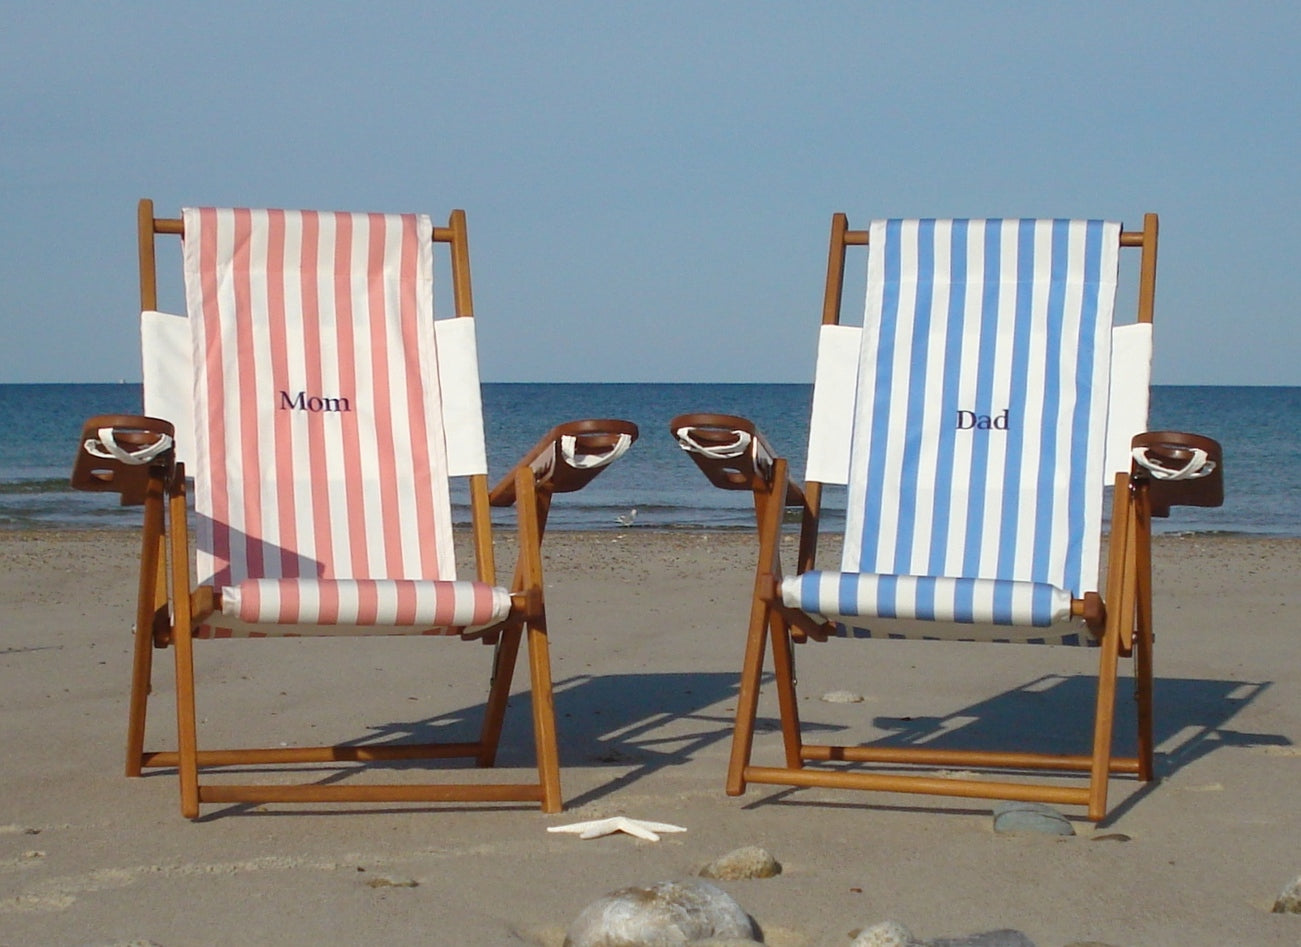 Shop limited editions of the best beach chair with these short runs of unique, premium fabrics